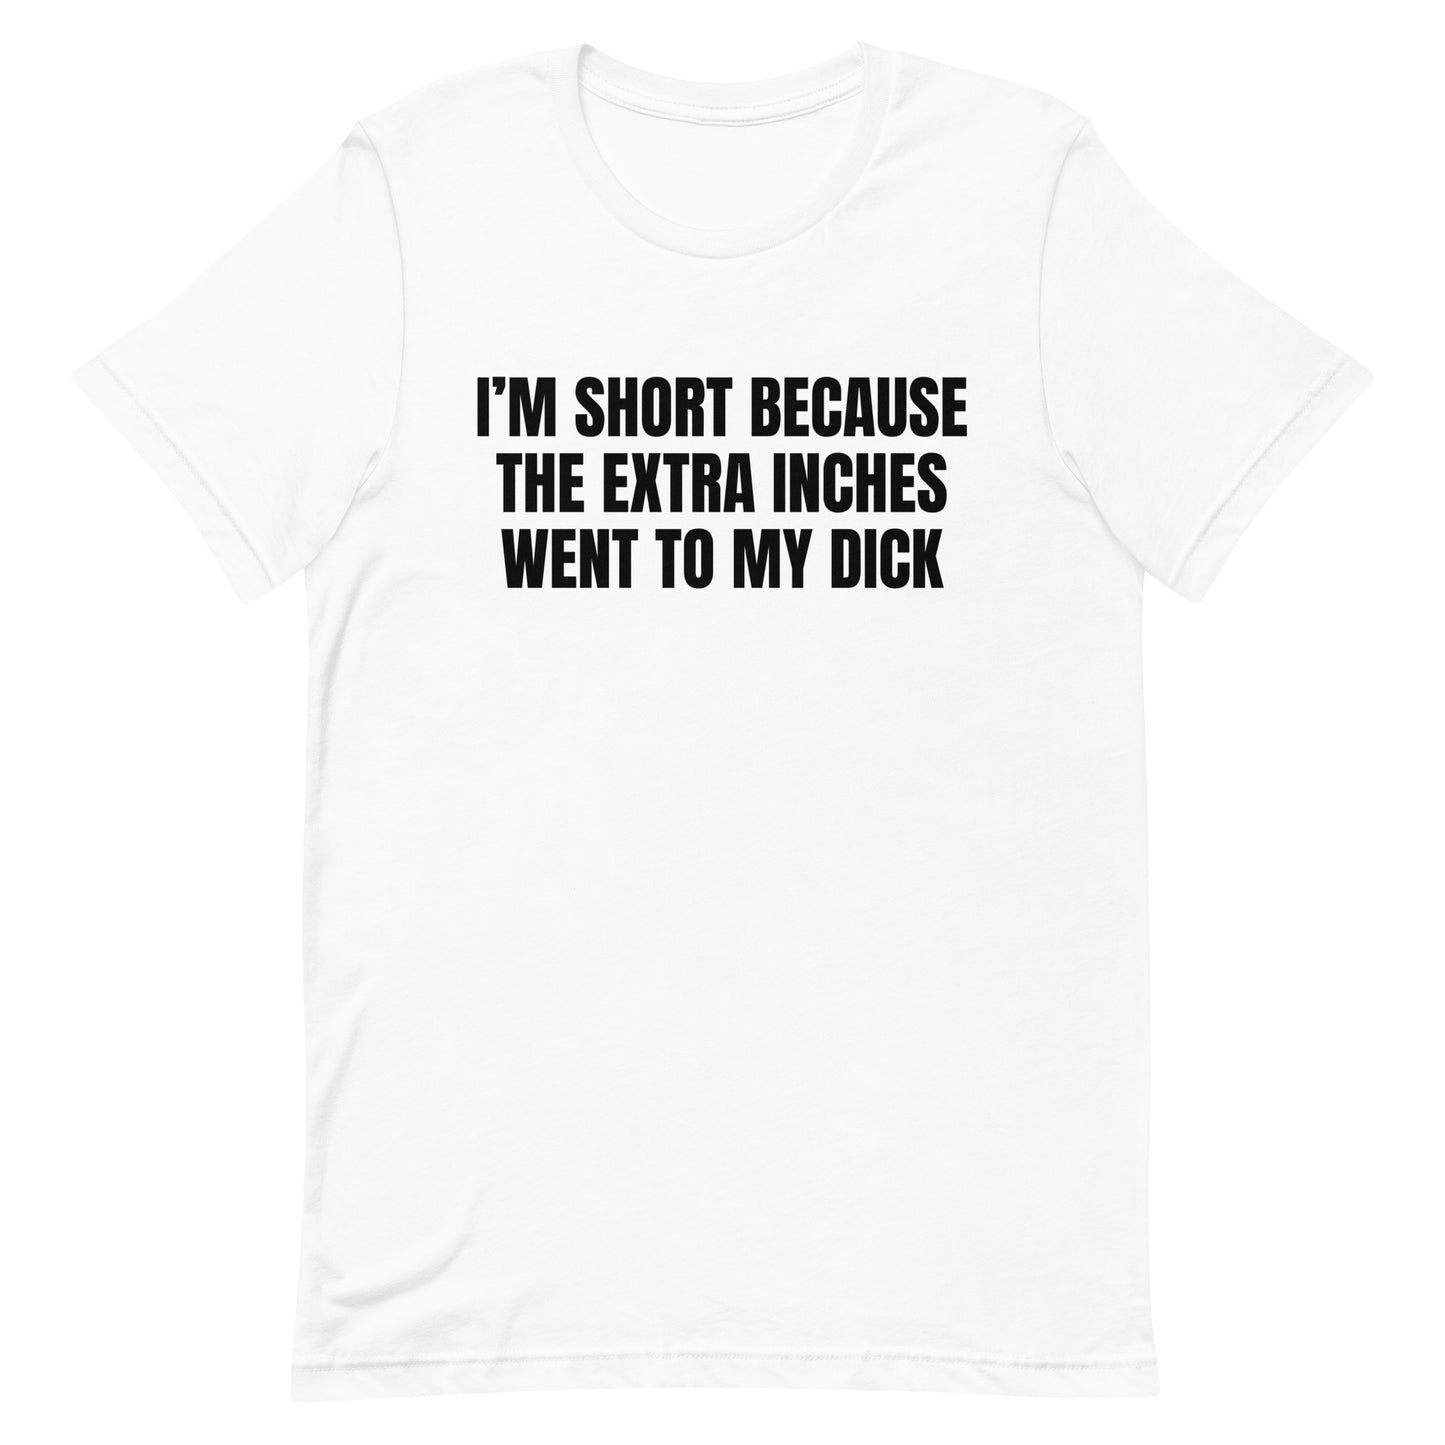 I'm Short Because the Extra Inches Went to My Dick Unisex t-shirt